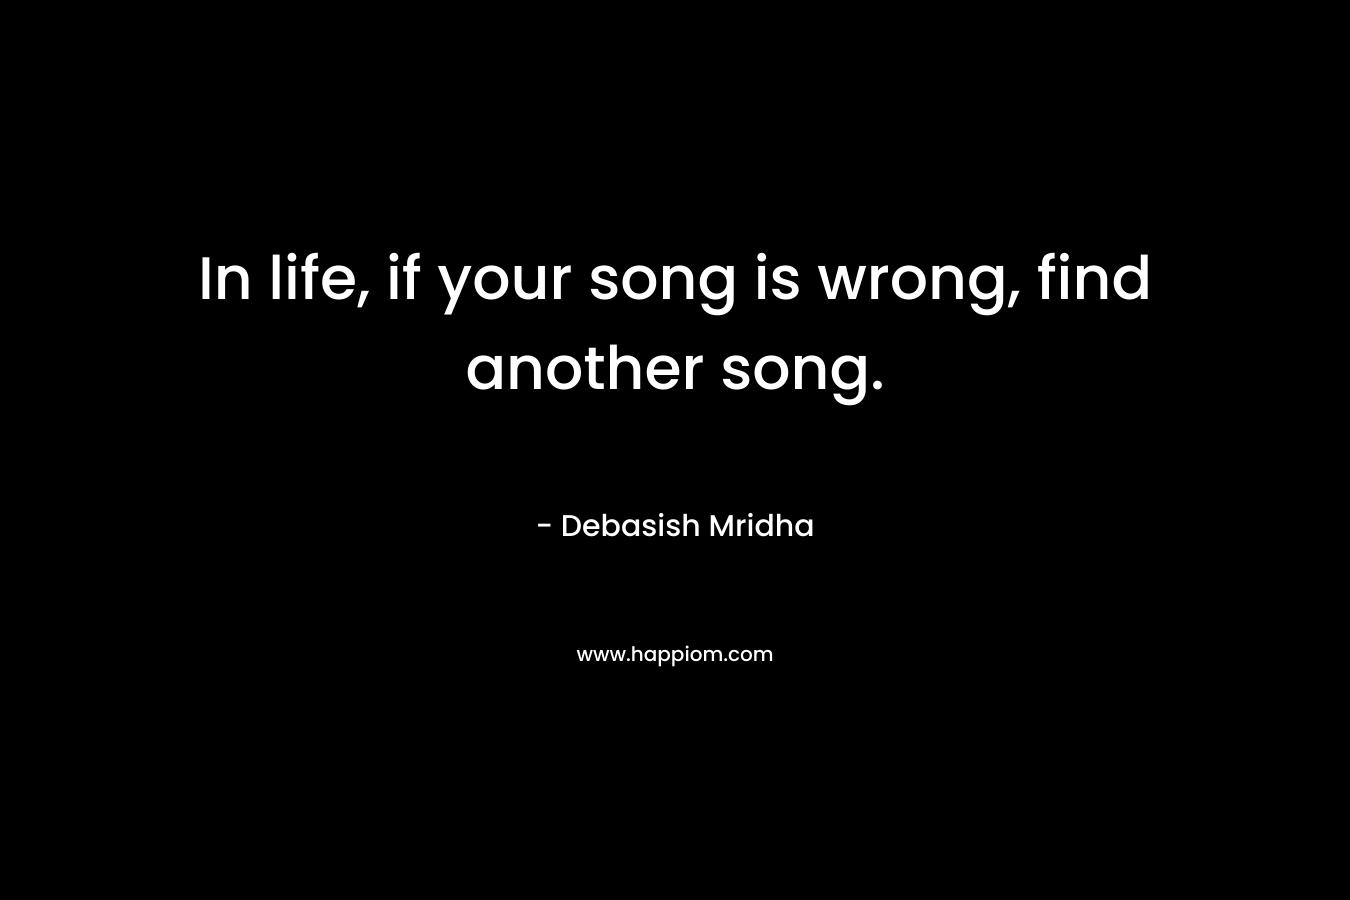 In life, if your song is wrong, find another song.